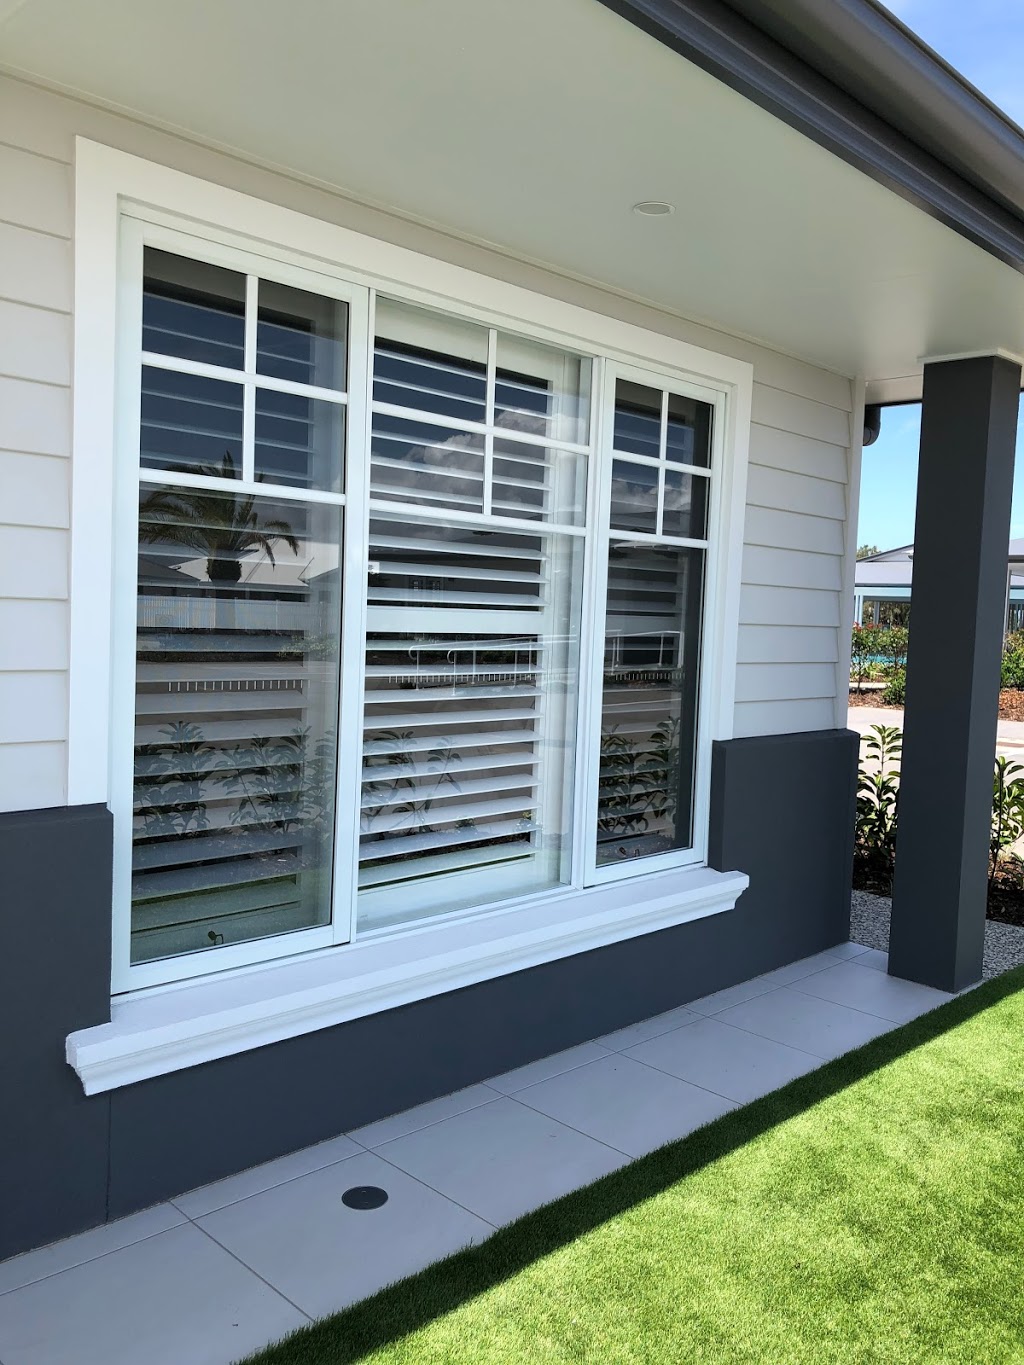 All-About Security Screens & Blinds Pty Ltd | Shed 4/15 Industry Dr, Caboolture QLD 4510, Australia | Phone: (07) 5405 1725